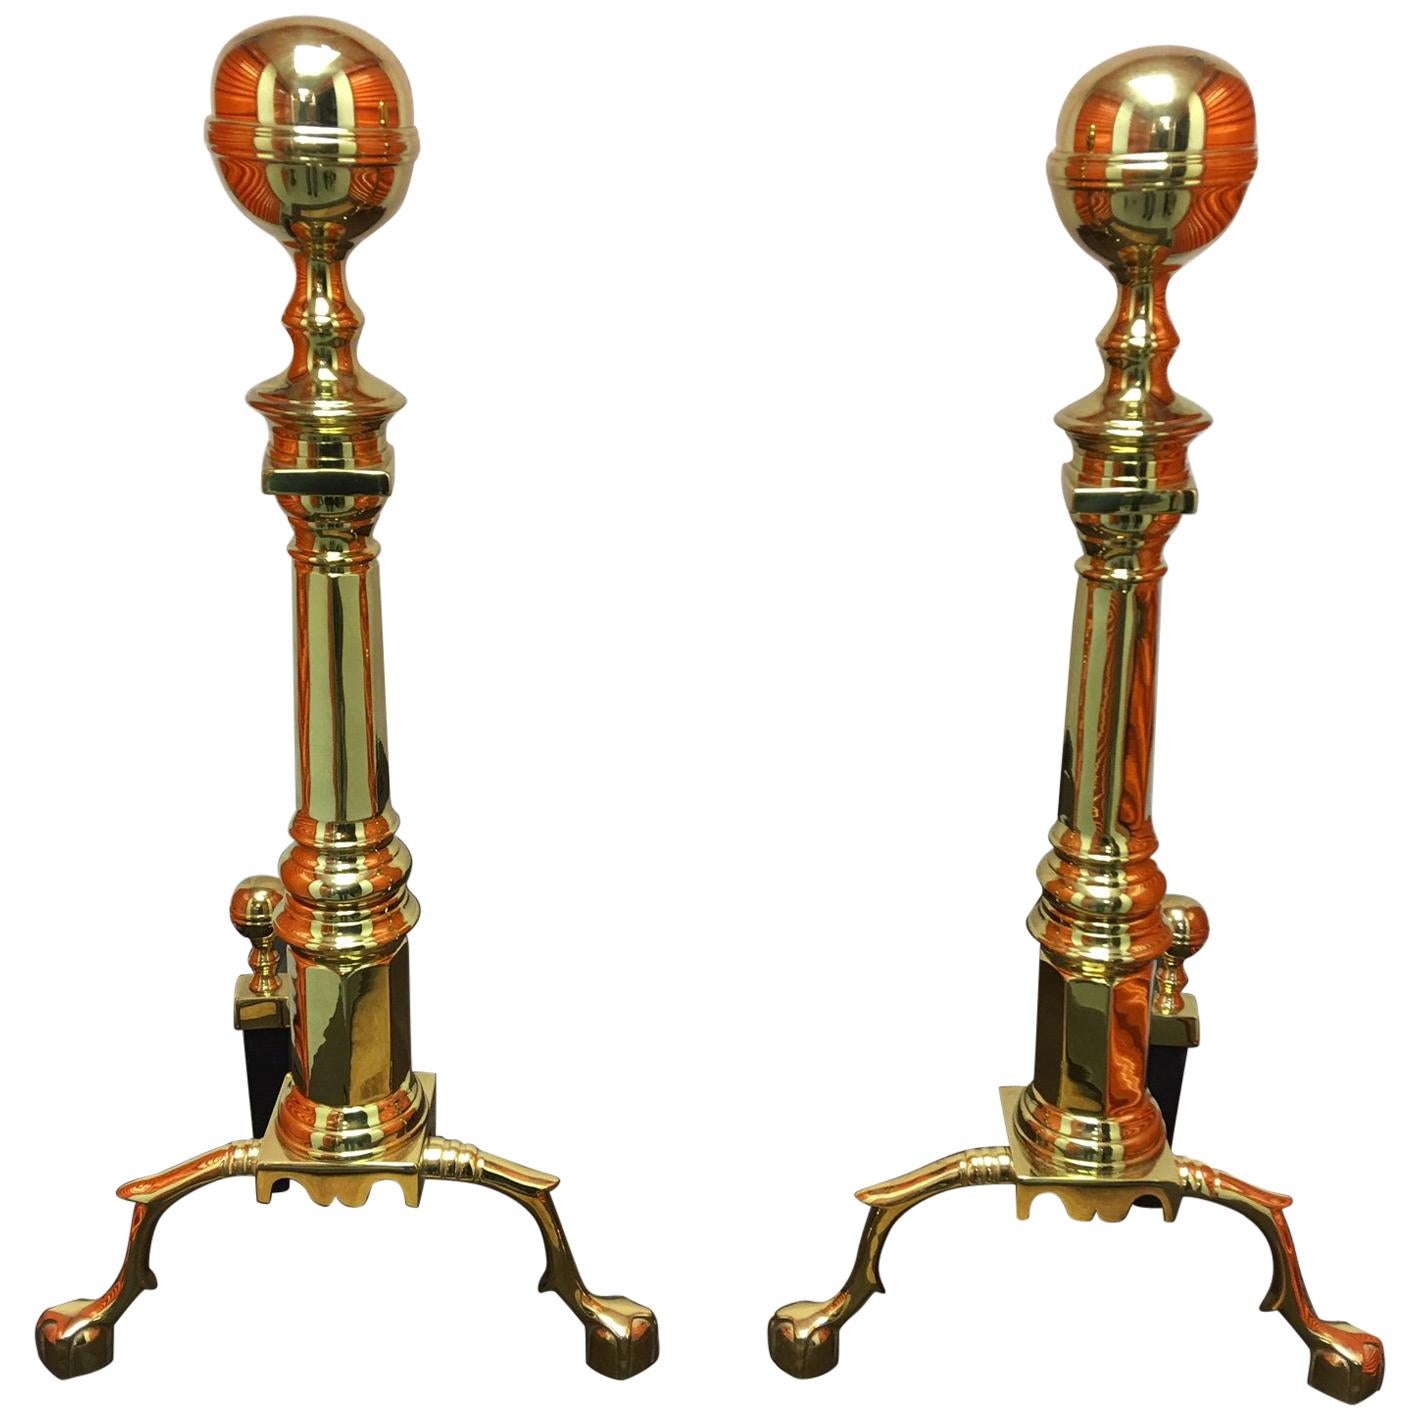 Pair of Williamsburg Style Polished Brass Andirons, 19th Century